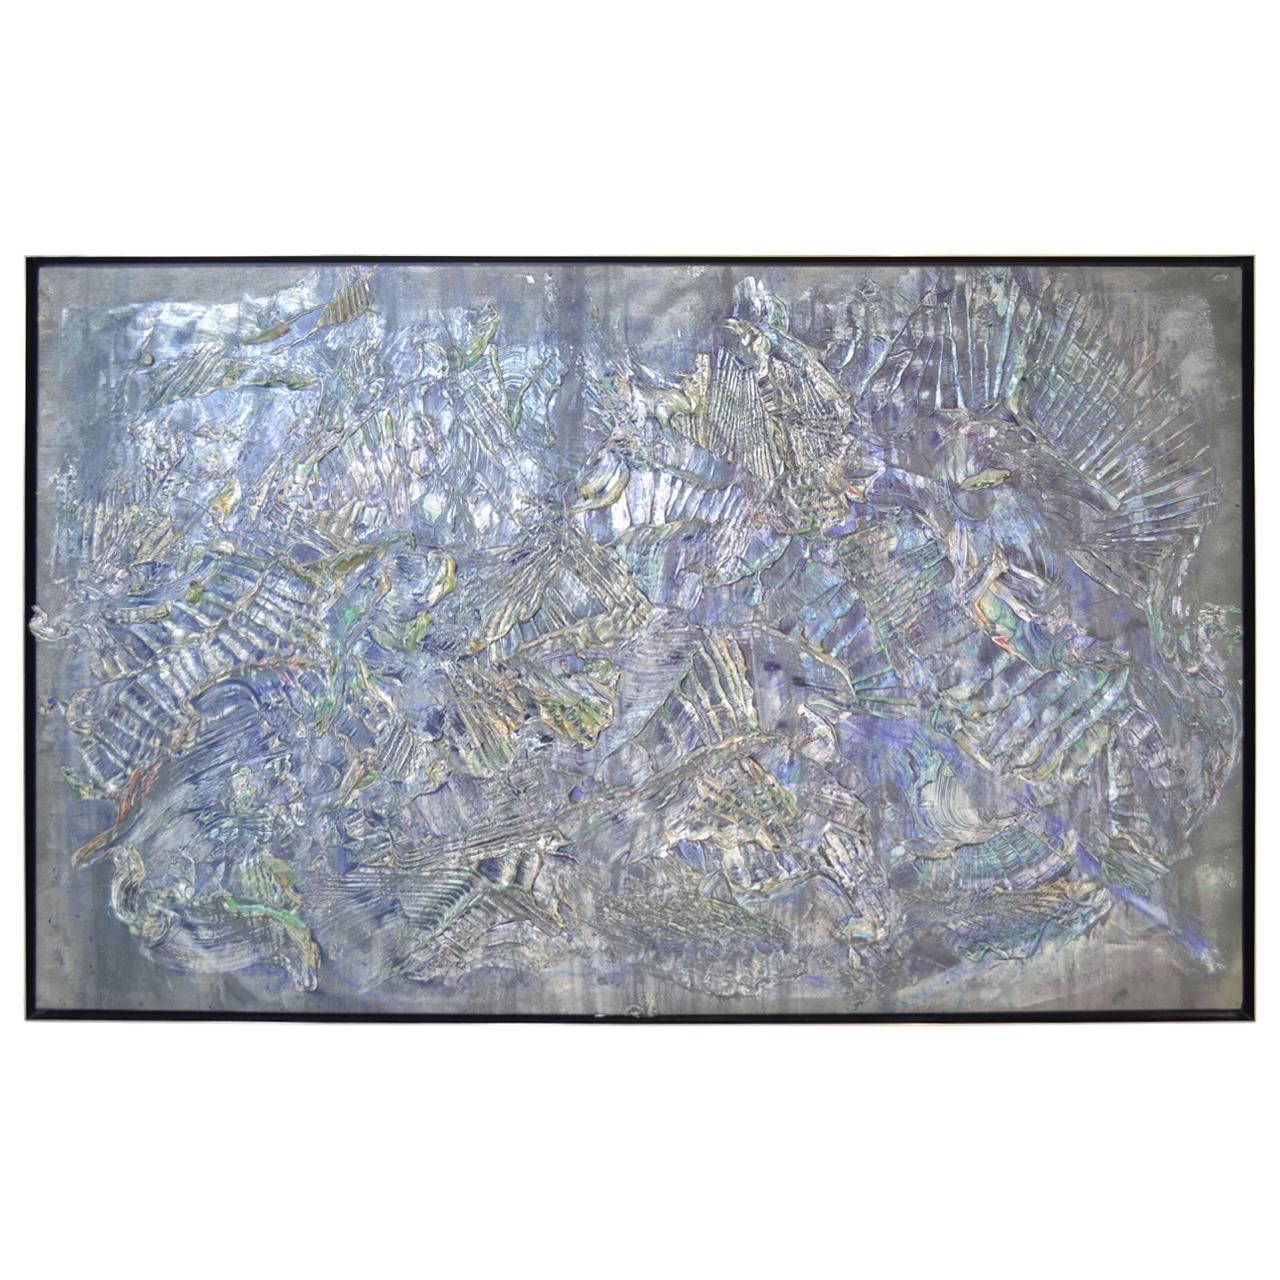 Roy Lerner, Tears of the Moon, Large Textured Acrylic Abstract on Canvas